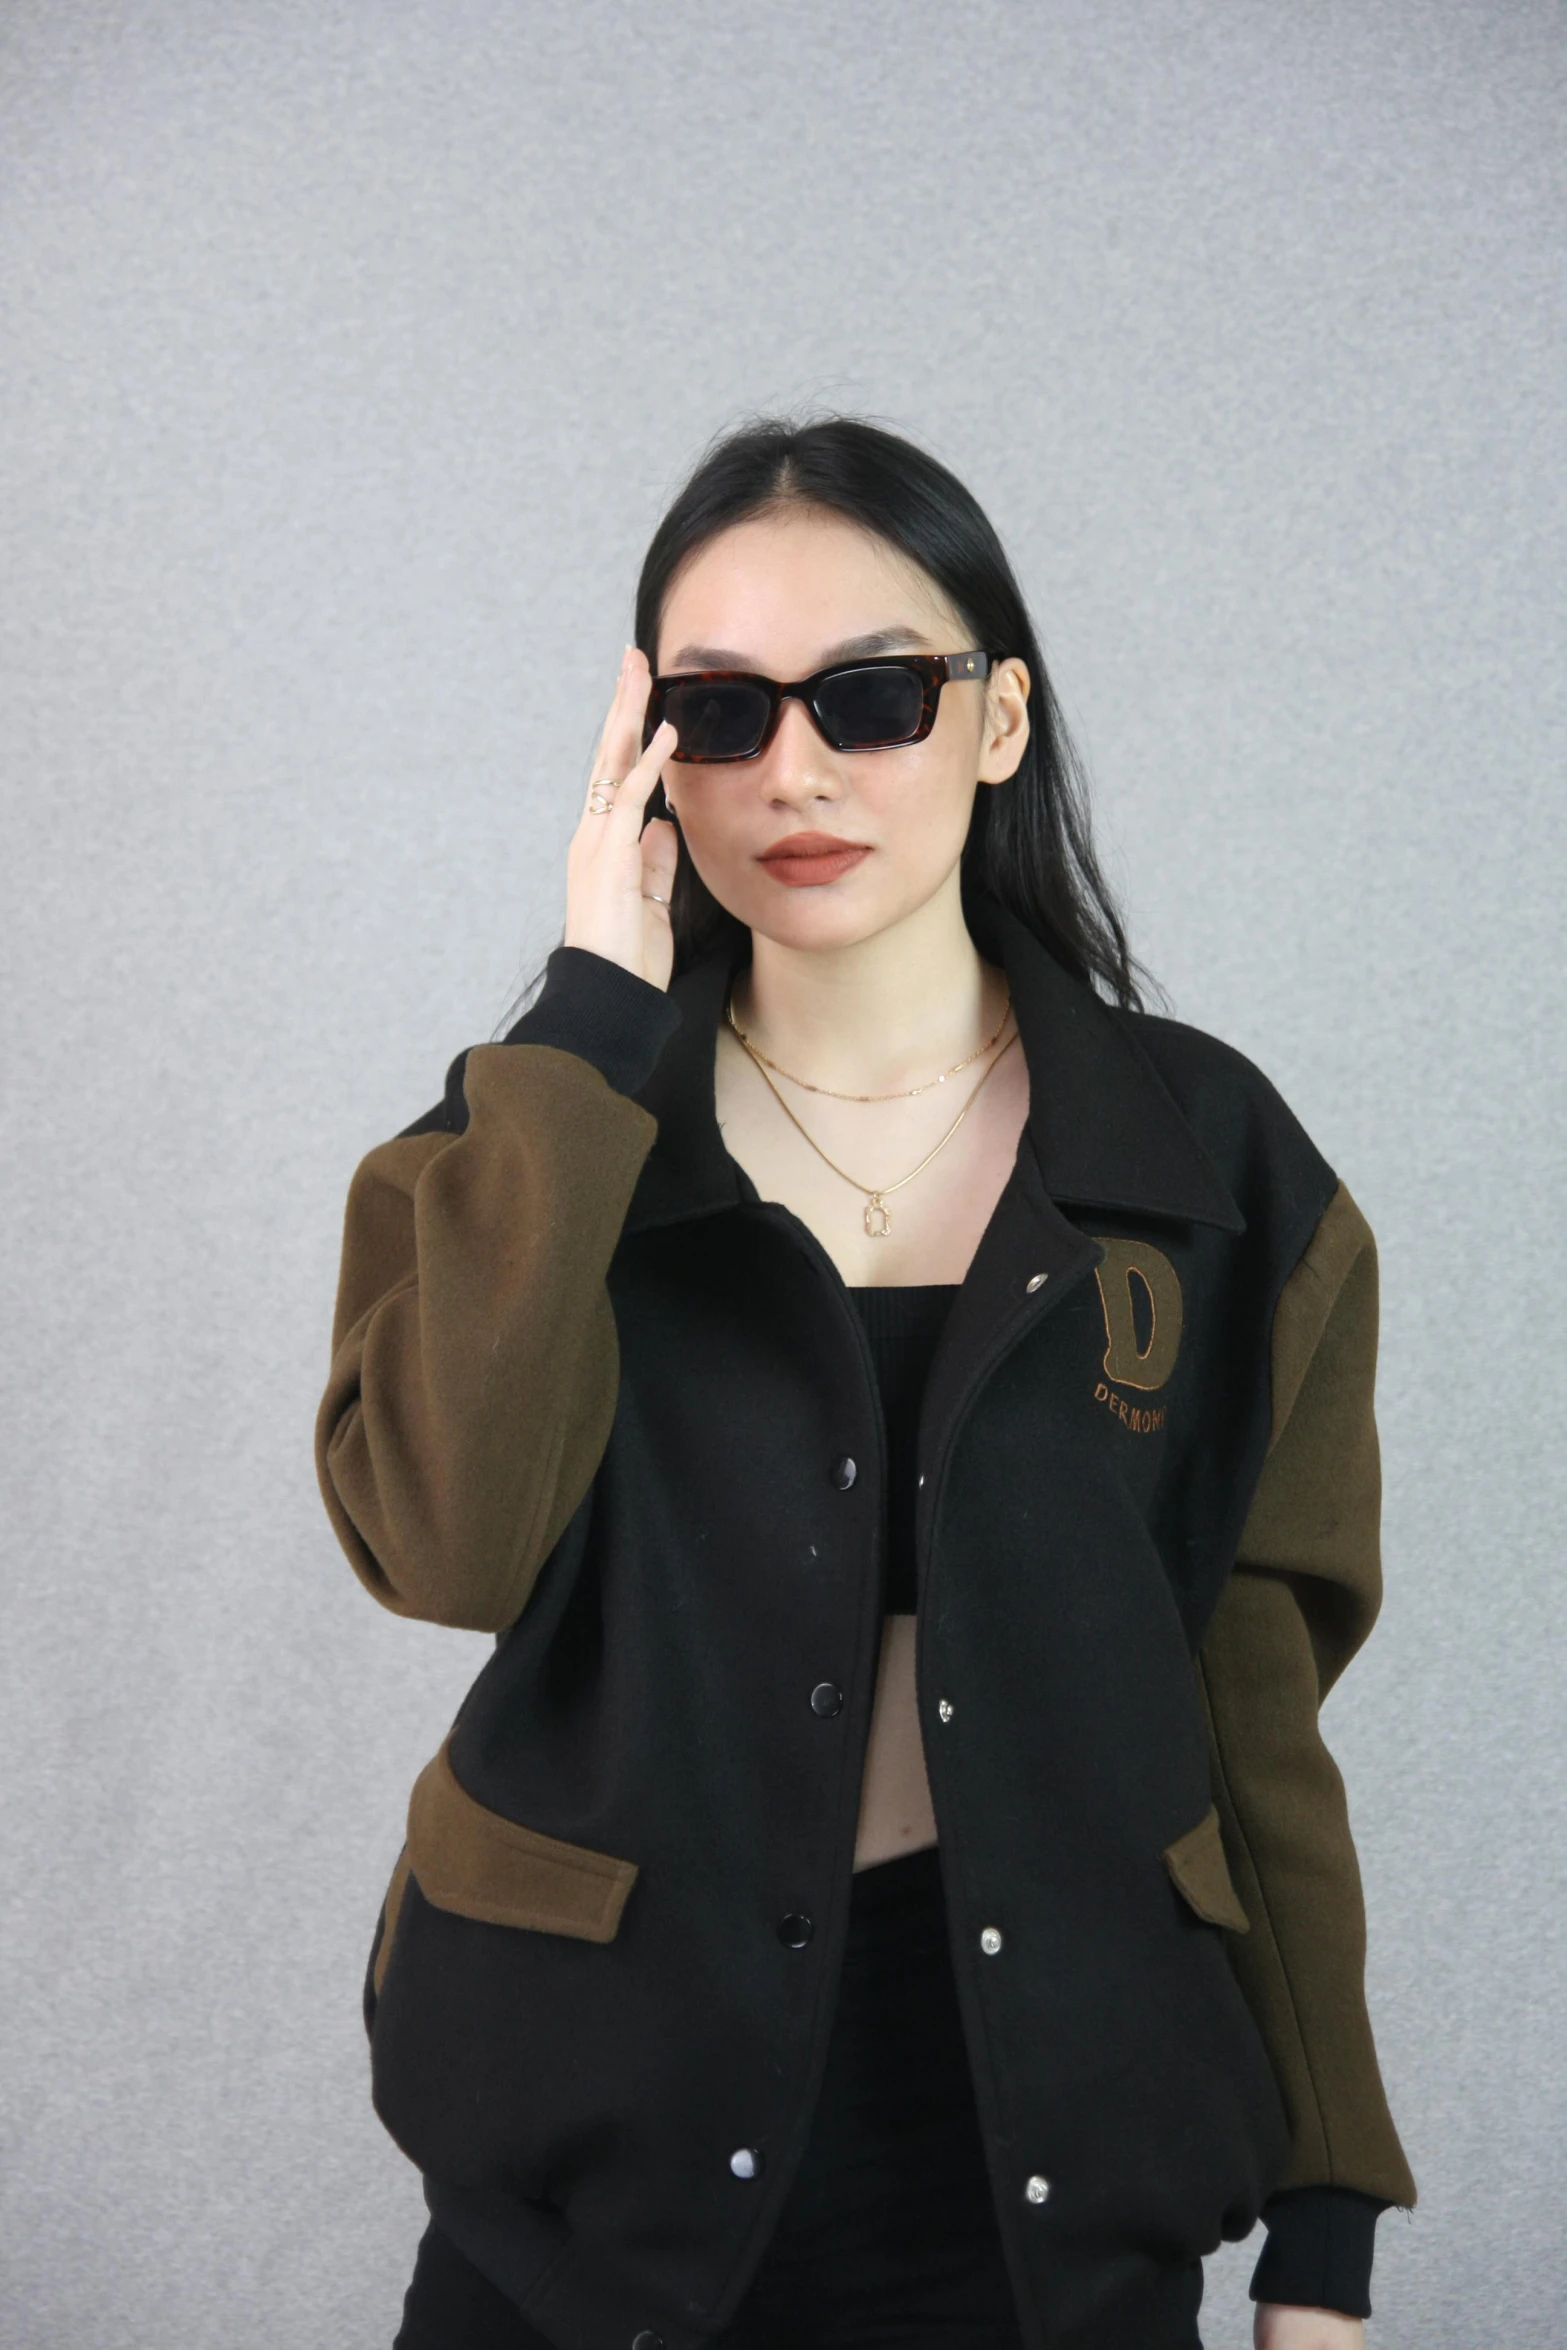 the woman with her hand on her ear wearing sunglasses